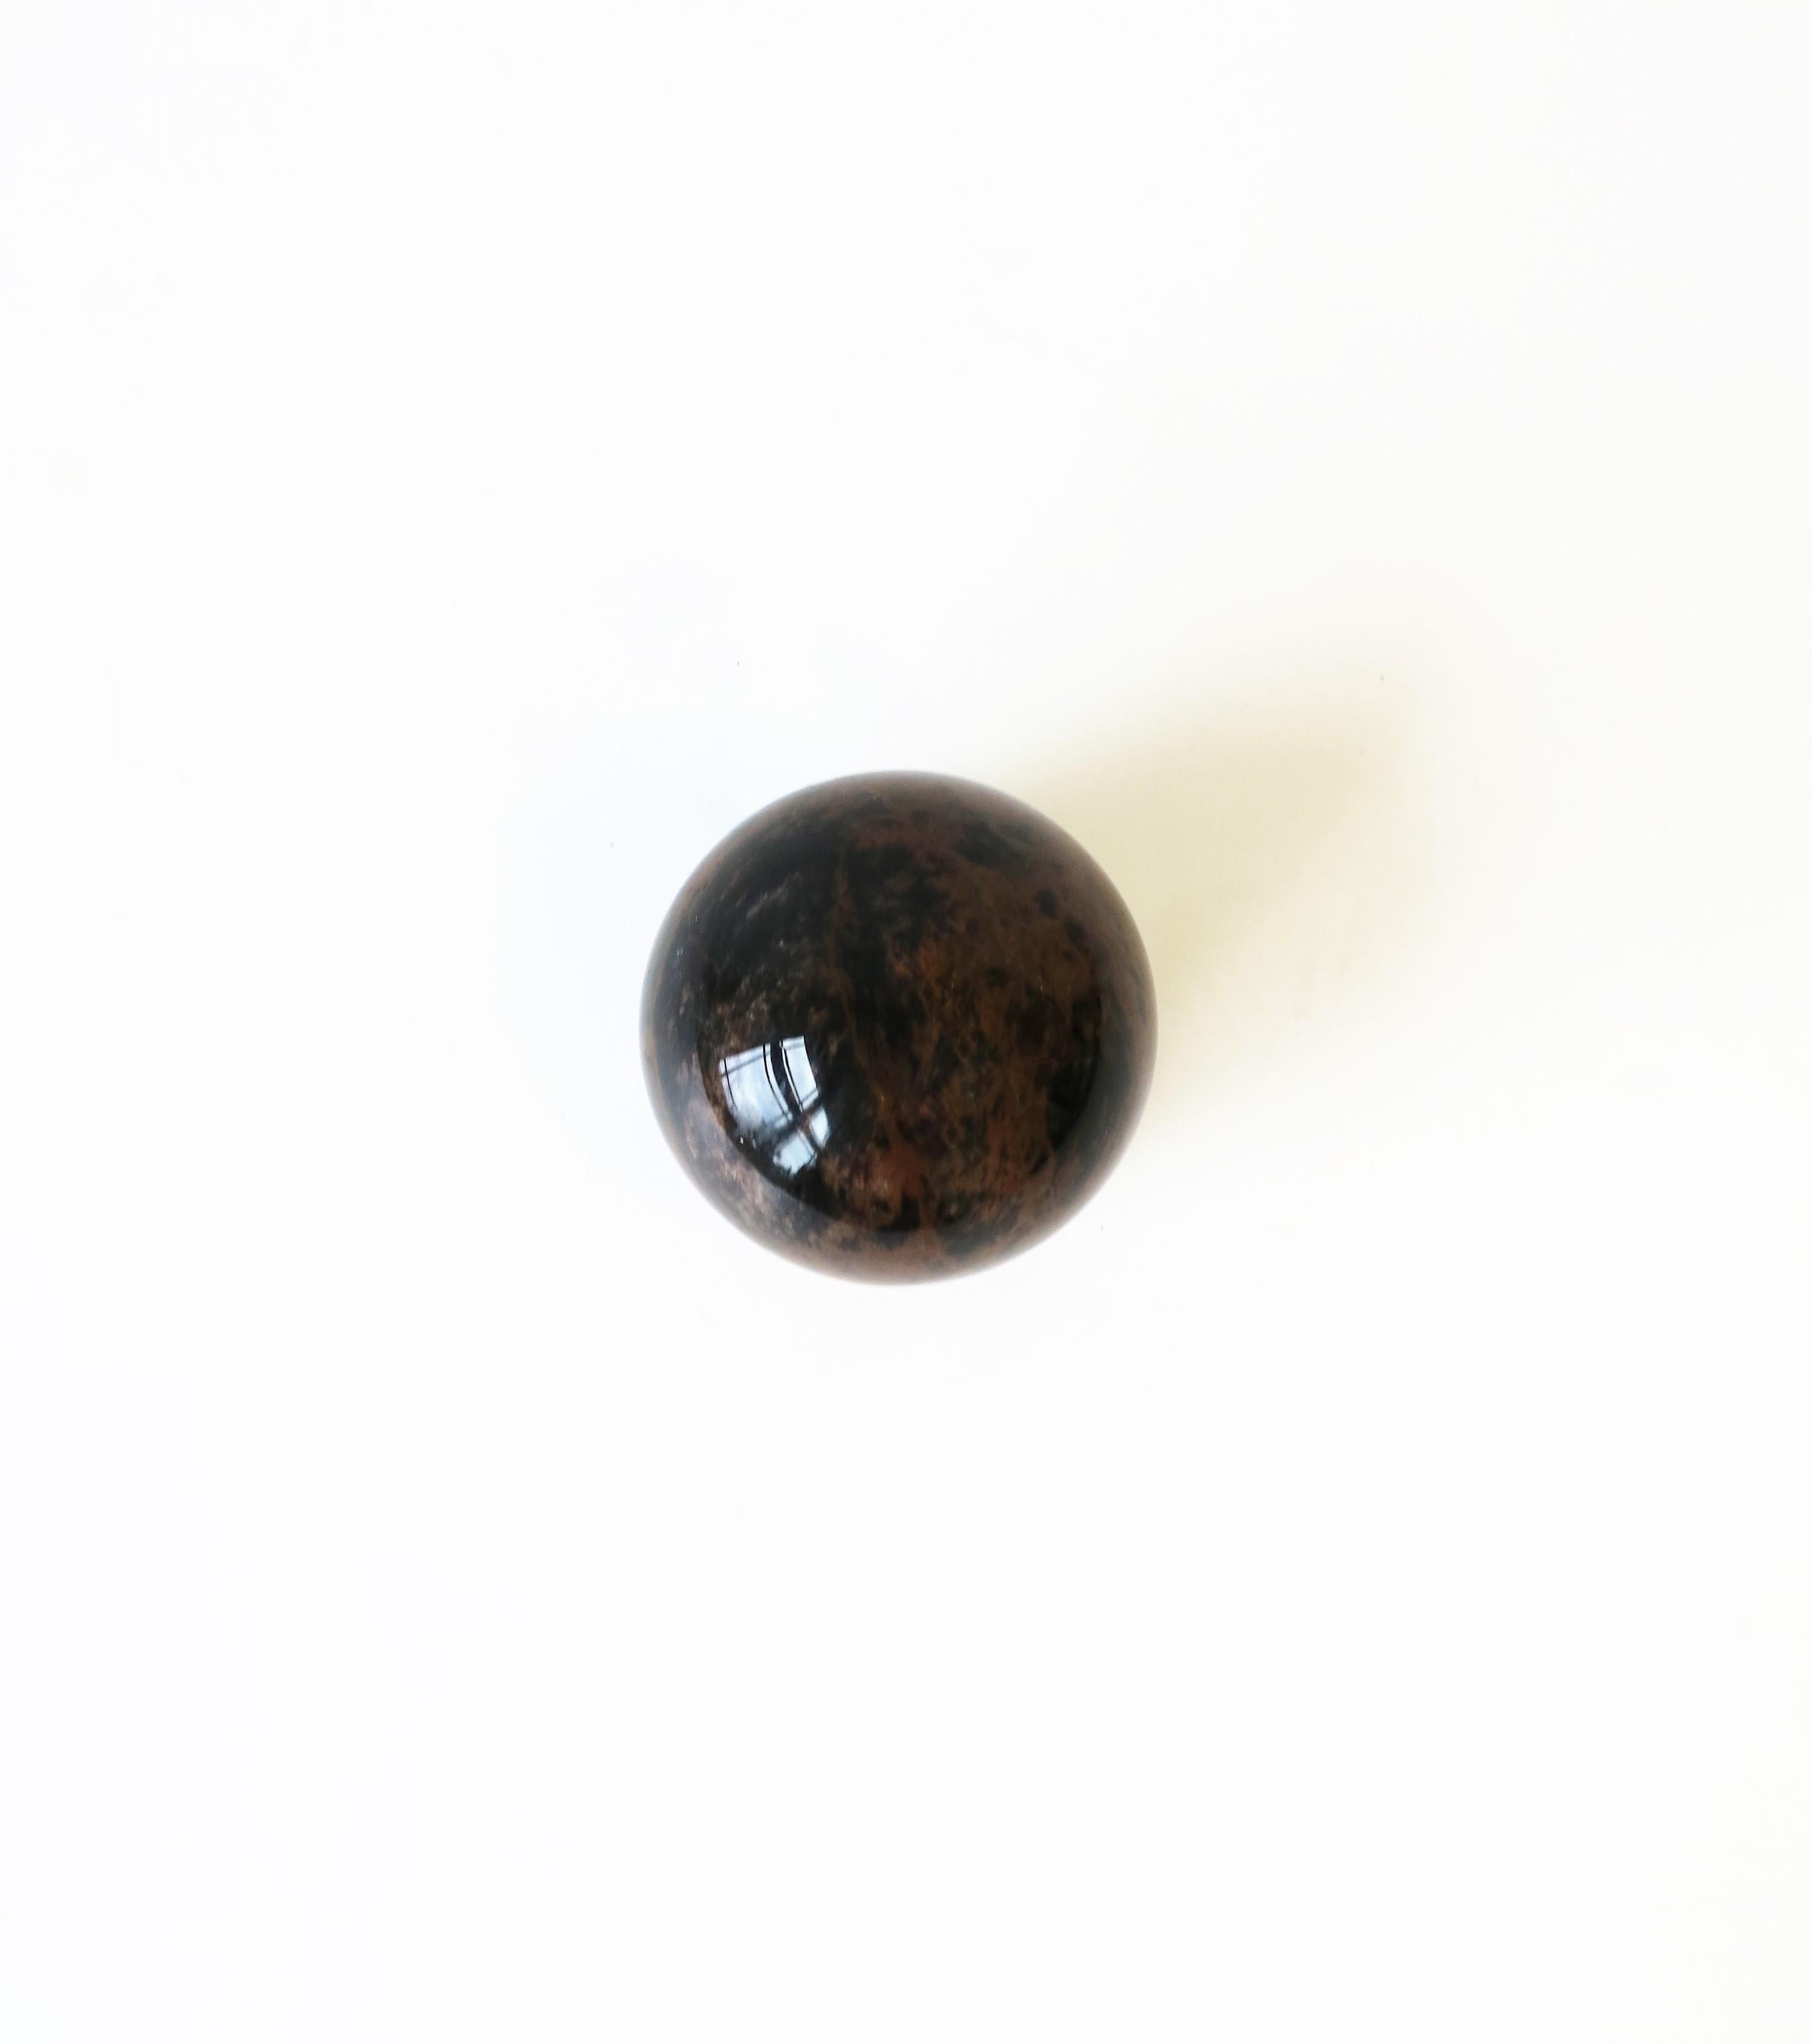 Polished Black Marble Sphere Decorative Object Desk Accessory, 1990s